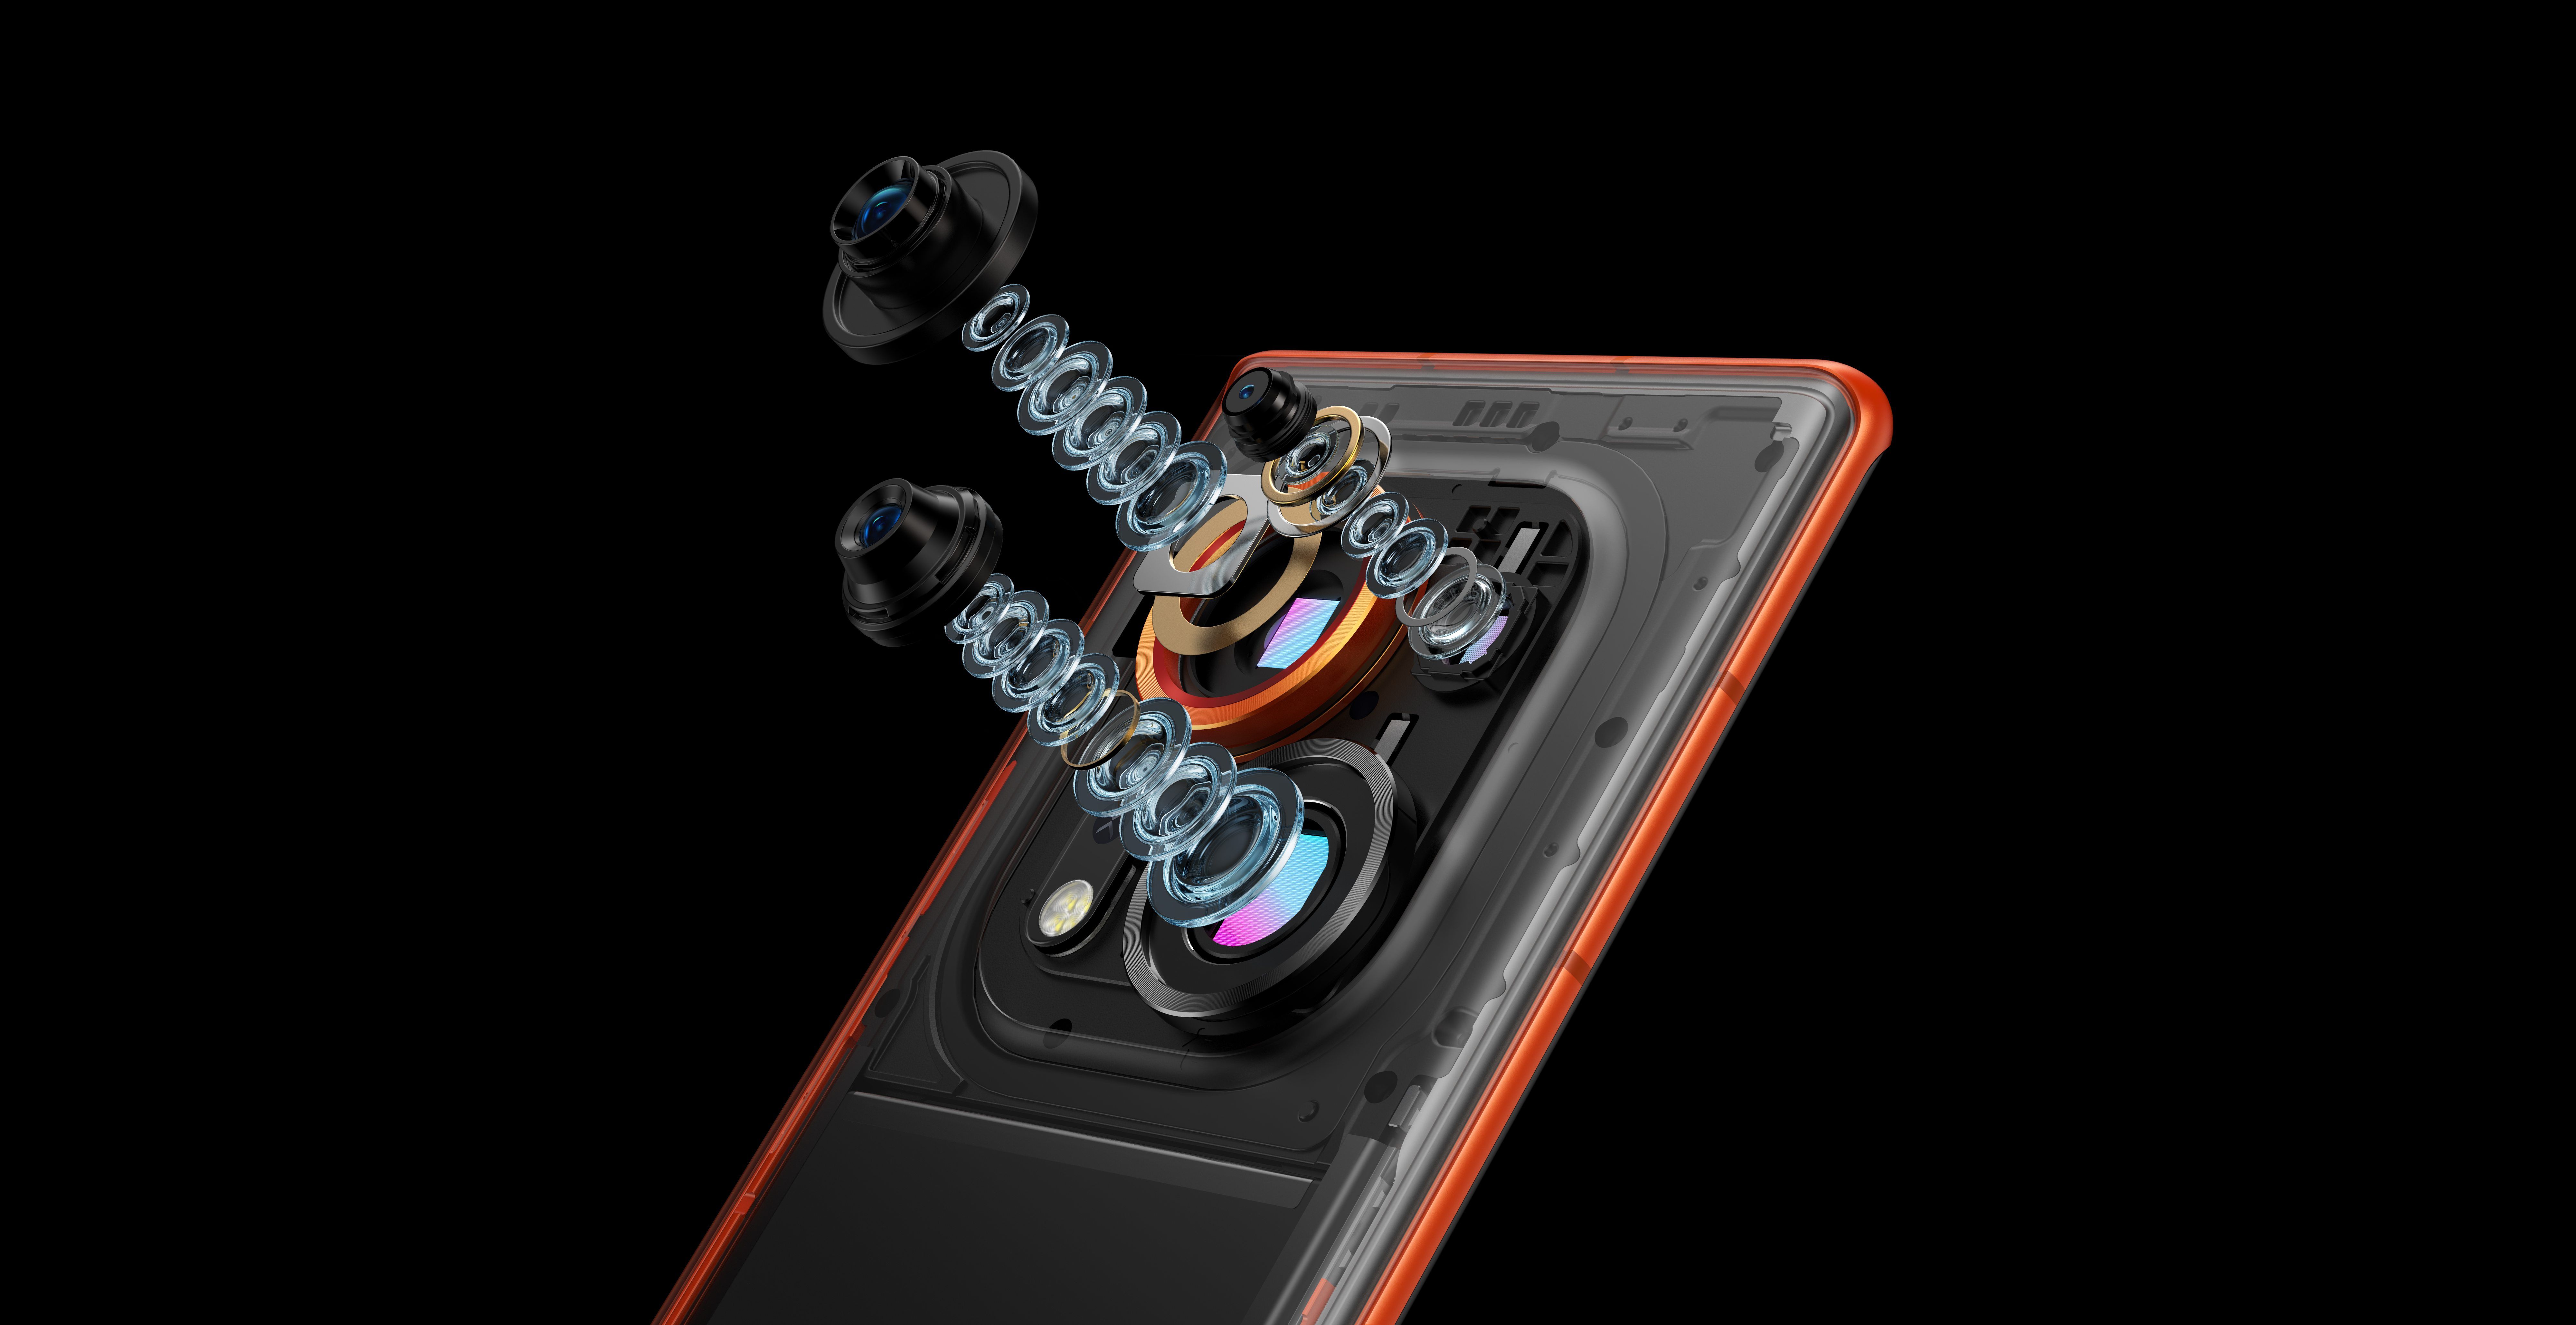 2.PHANTOM X2 Pro 5G is the worldí»s first smartphone to feature a retractable portrait lens comparable to a professional camera